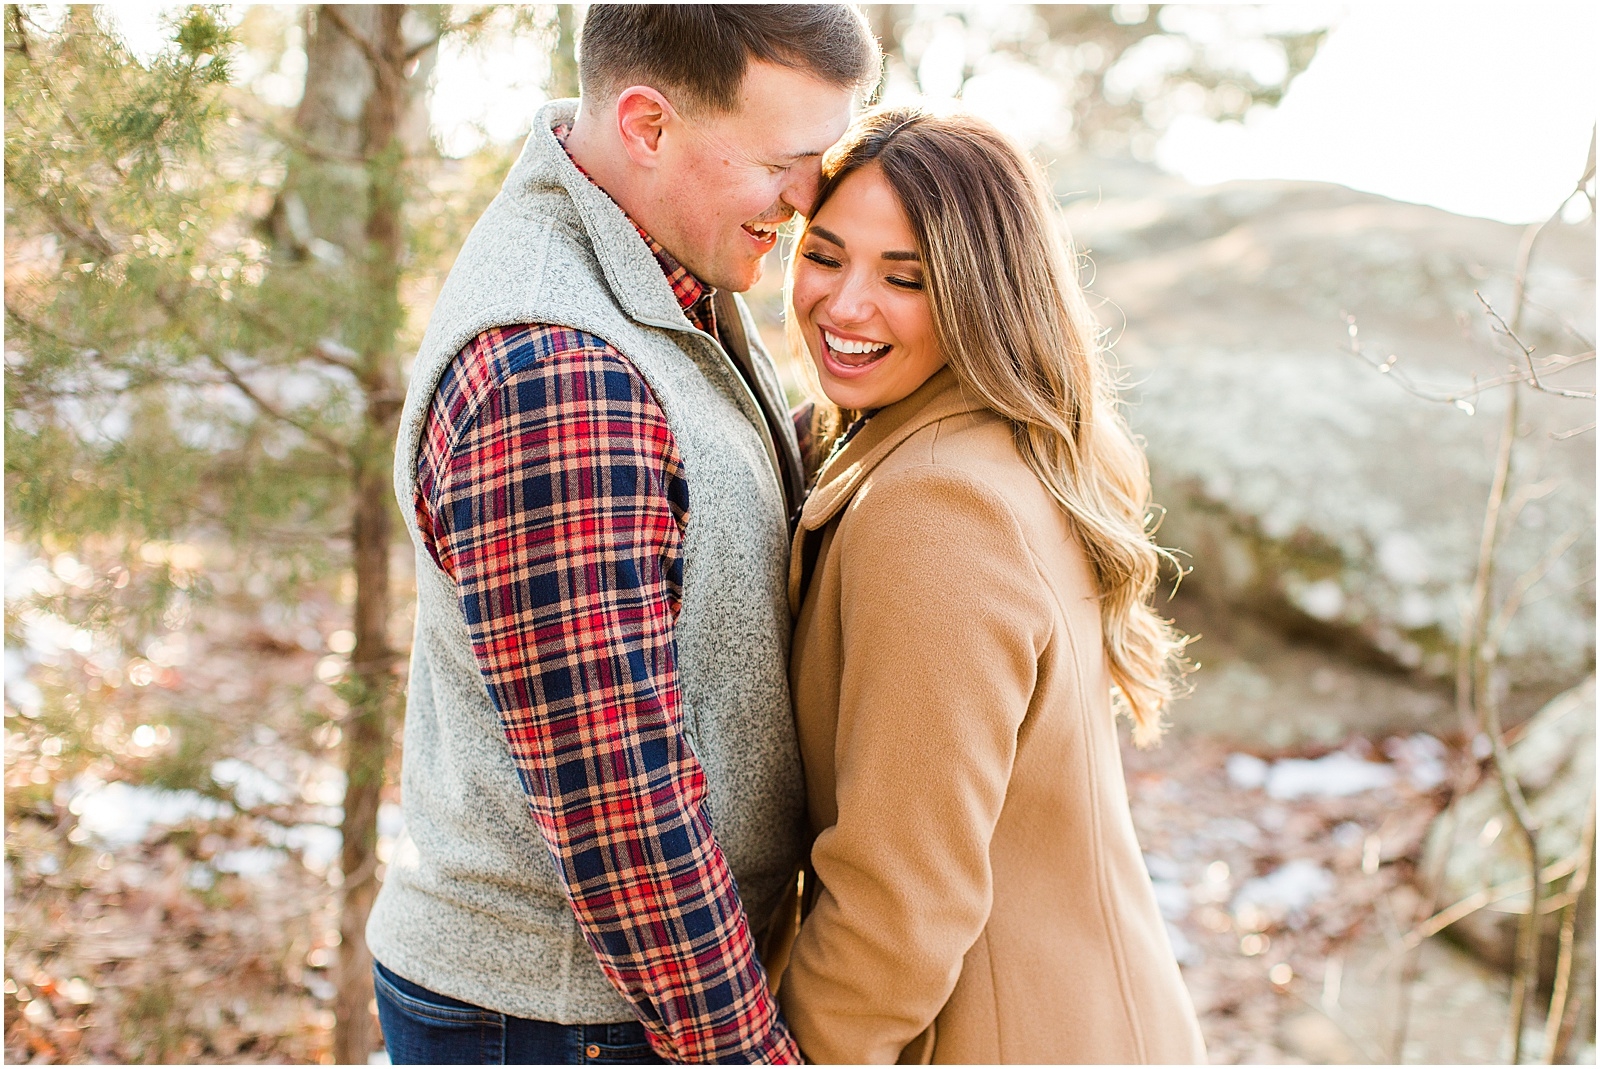 A Sunny Garden of the Gods Engagement Session | Shiloh and Lee | Bret and Brandie Photography032.jpg